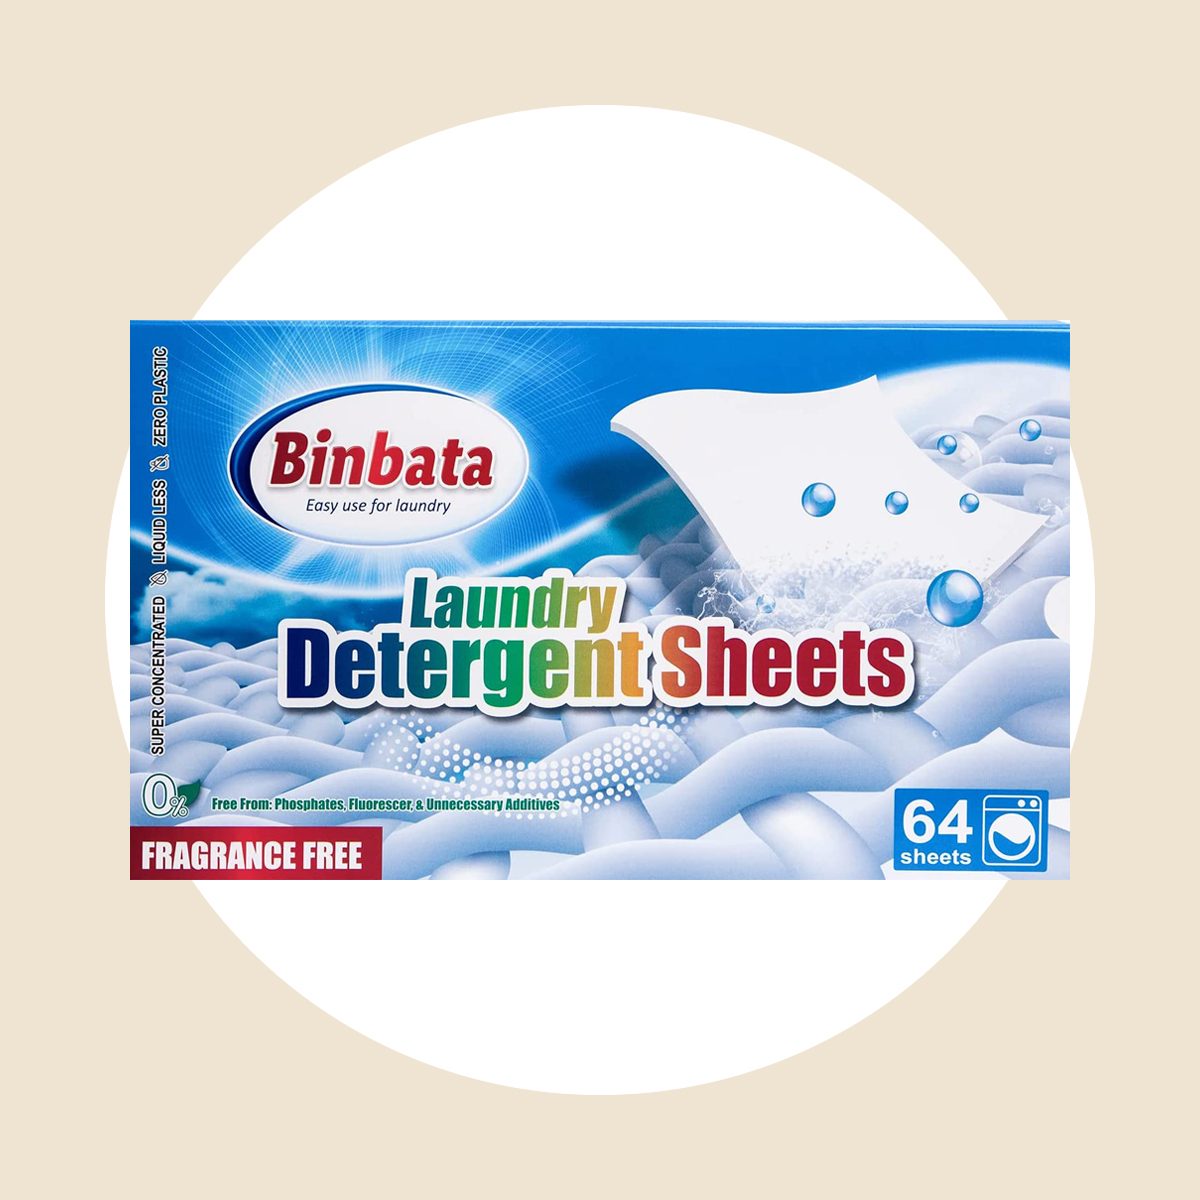  Earth Breeze Laundry Detergent Sheets - Fresh Scent - No  Plastic Jug (60 Loads) 30 Sheets, Liquidless Technology… : Health &  Household